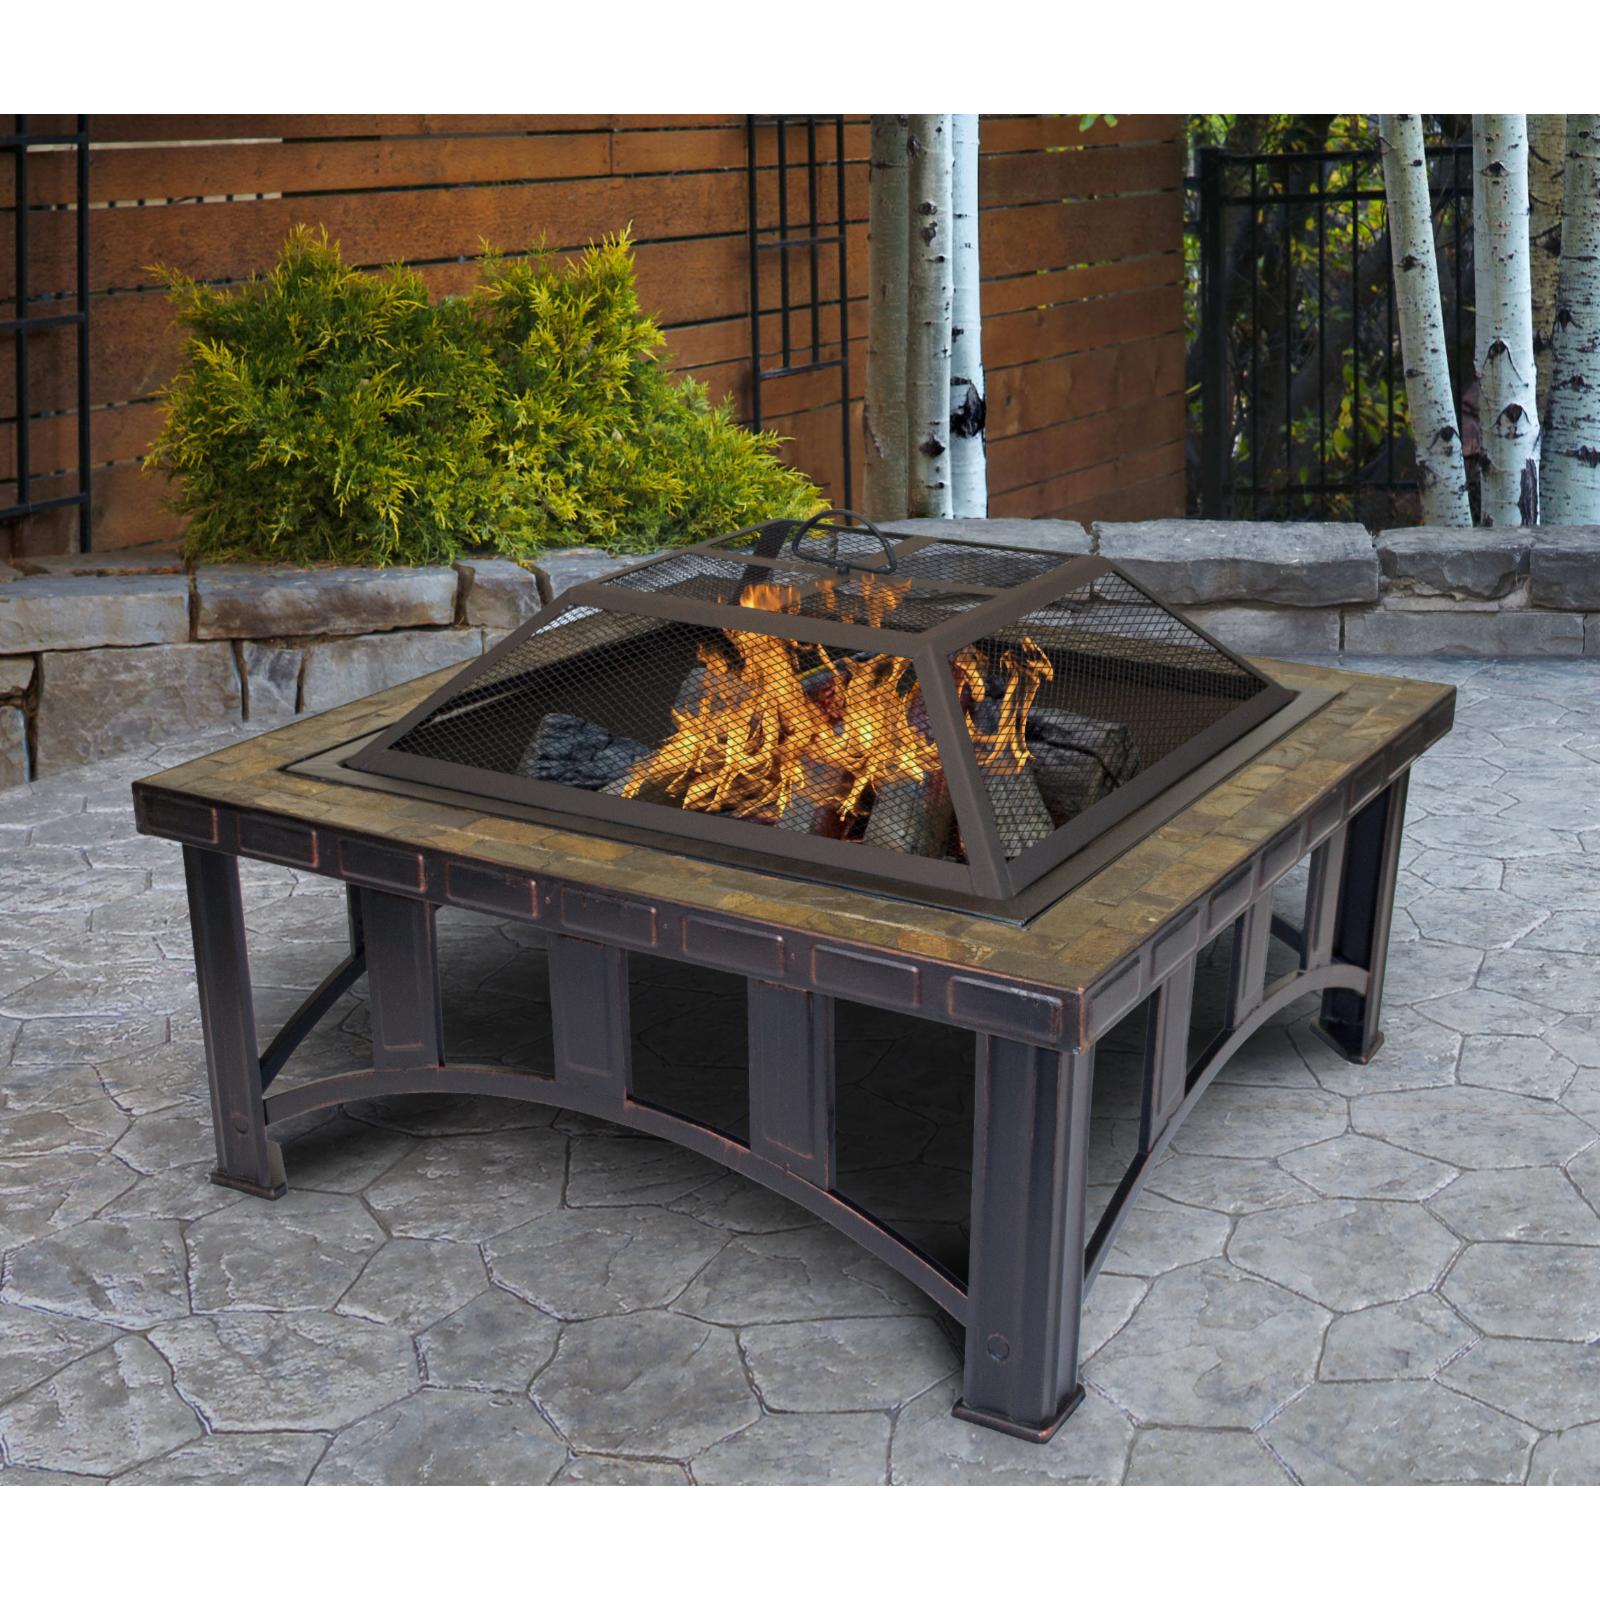 Outdoor Leisure Products Decorative Slate 30 inch Square Steel Fire Pit - image 4 of 7